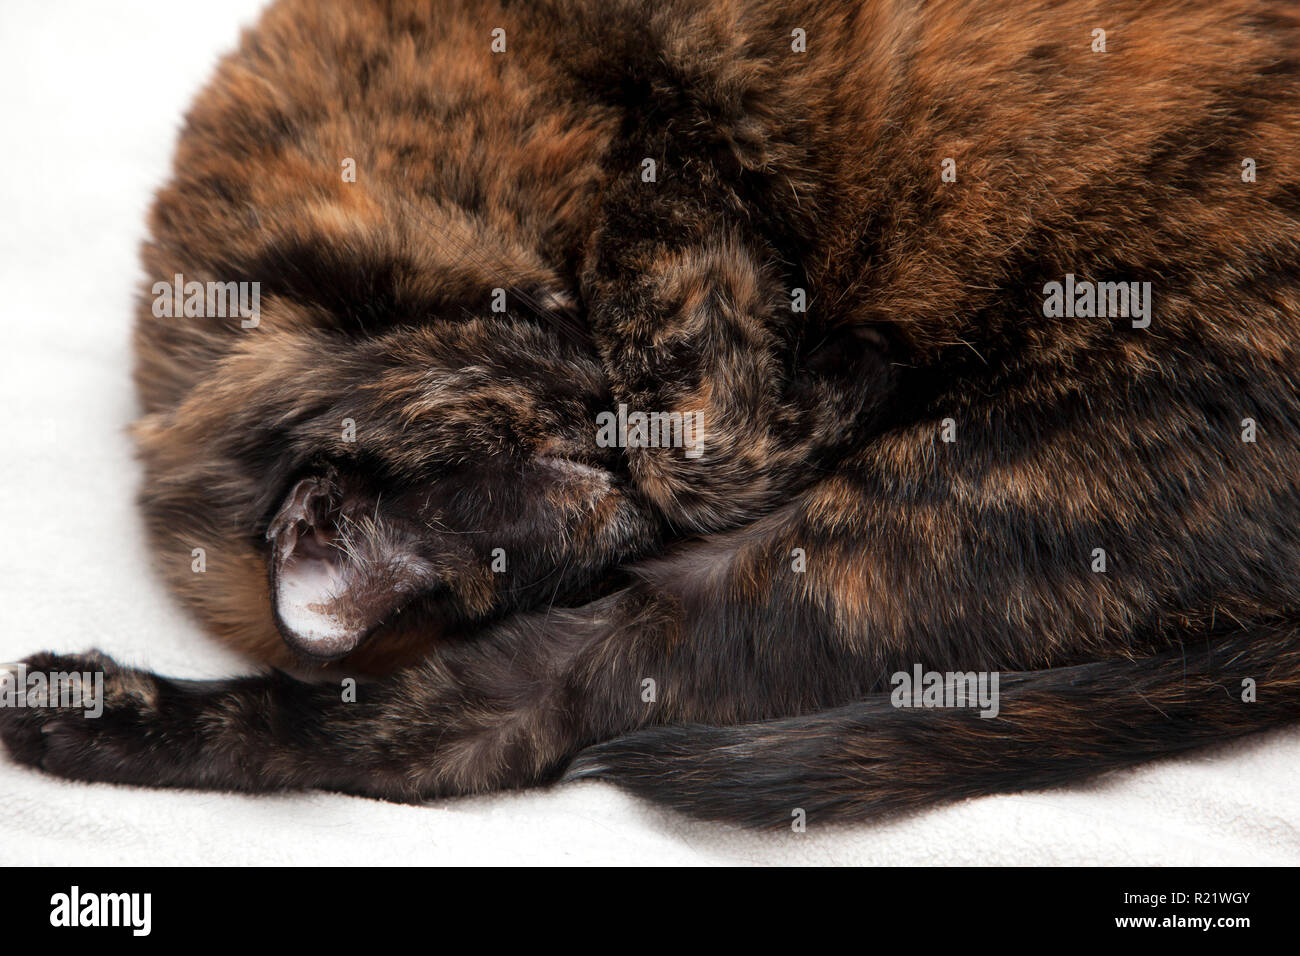 Beautiful black and orange cat curled up with it's paw over it's eyes wanting to sleep Stock Photo